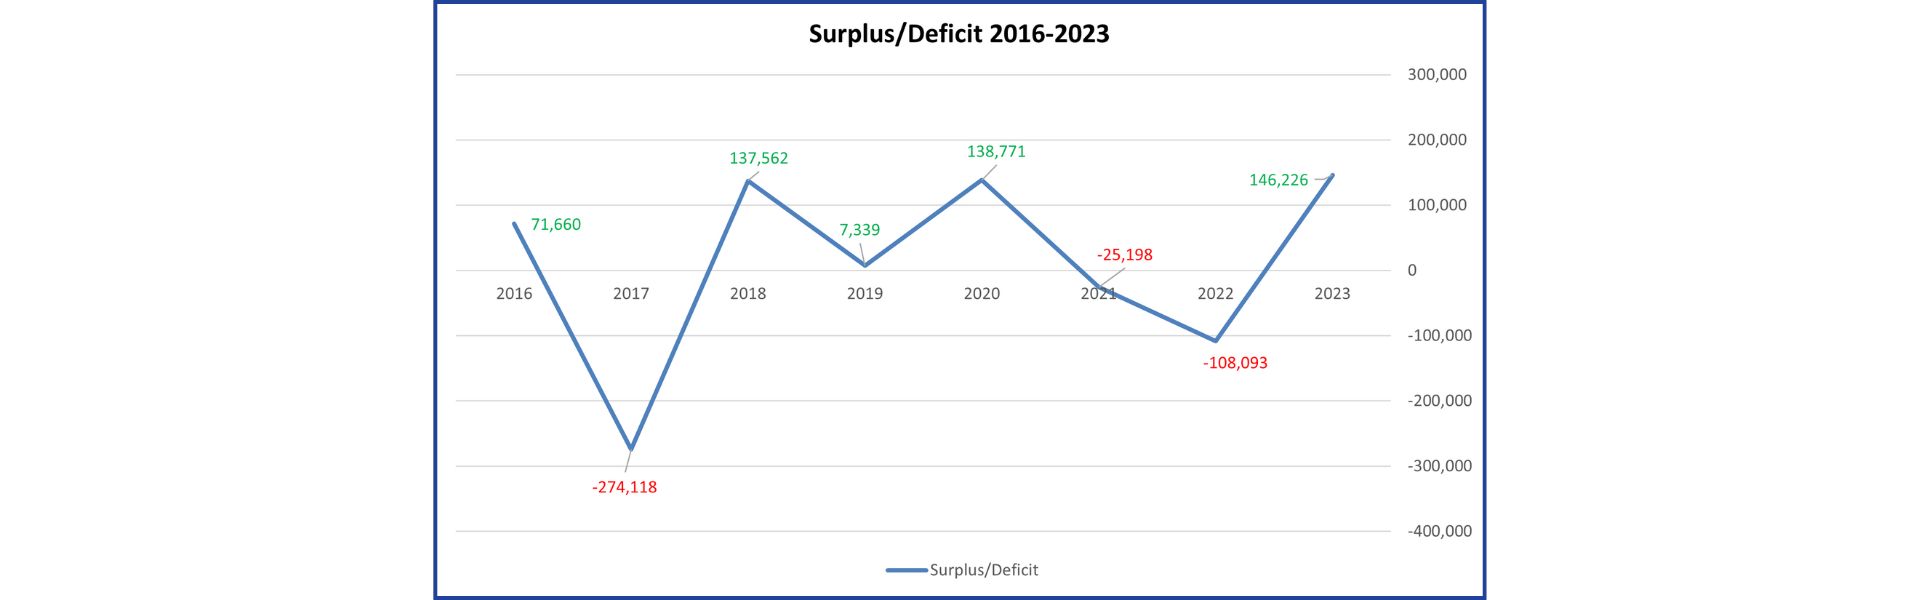 Line graph showing surplus/deficit over the years